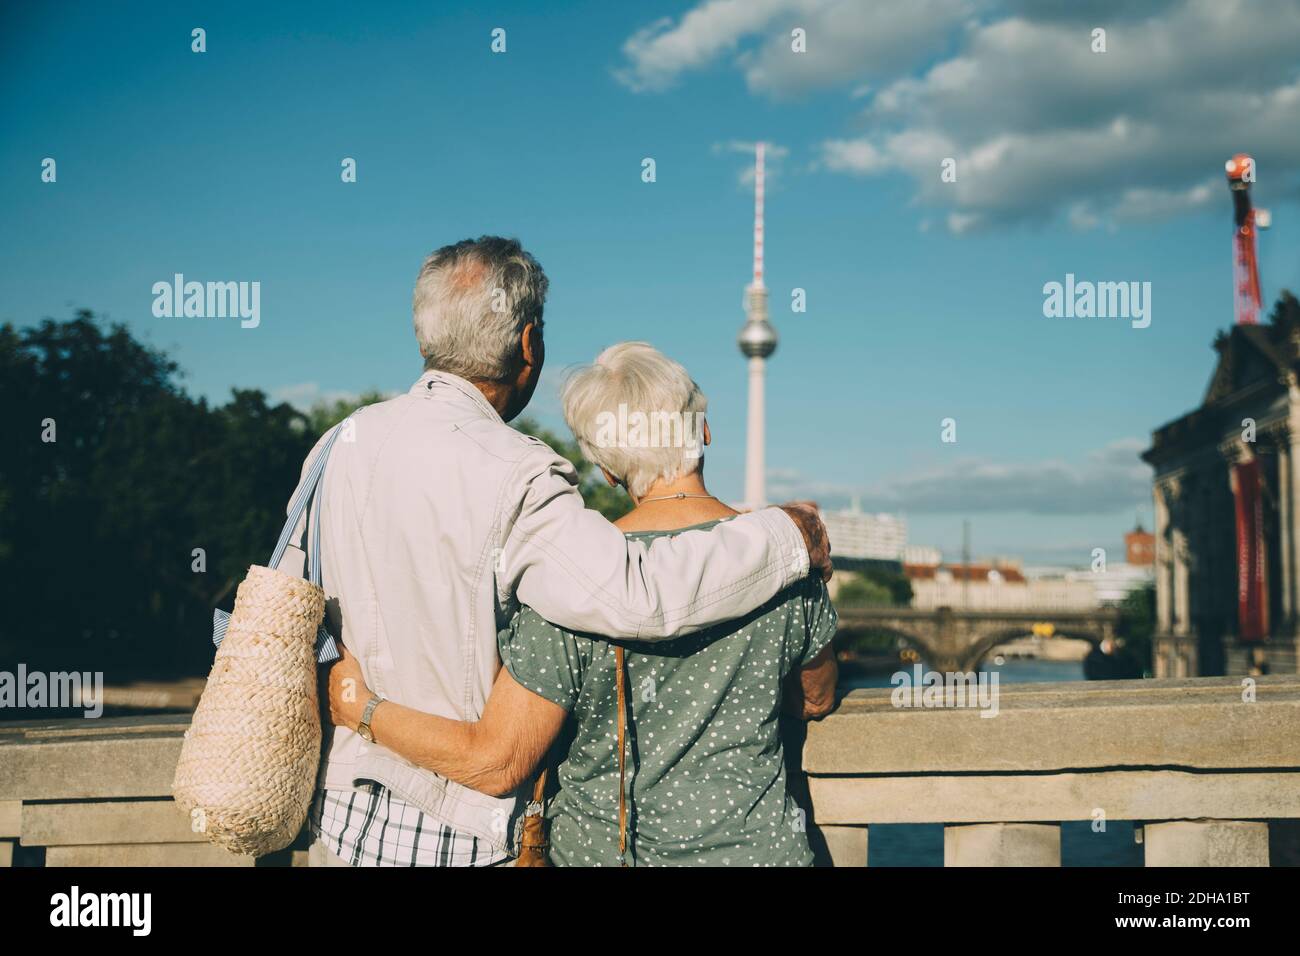 Rear view of senior couple with arm around looking at television tower from bridge in city Stock Photo